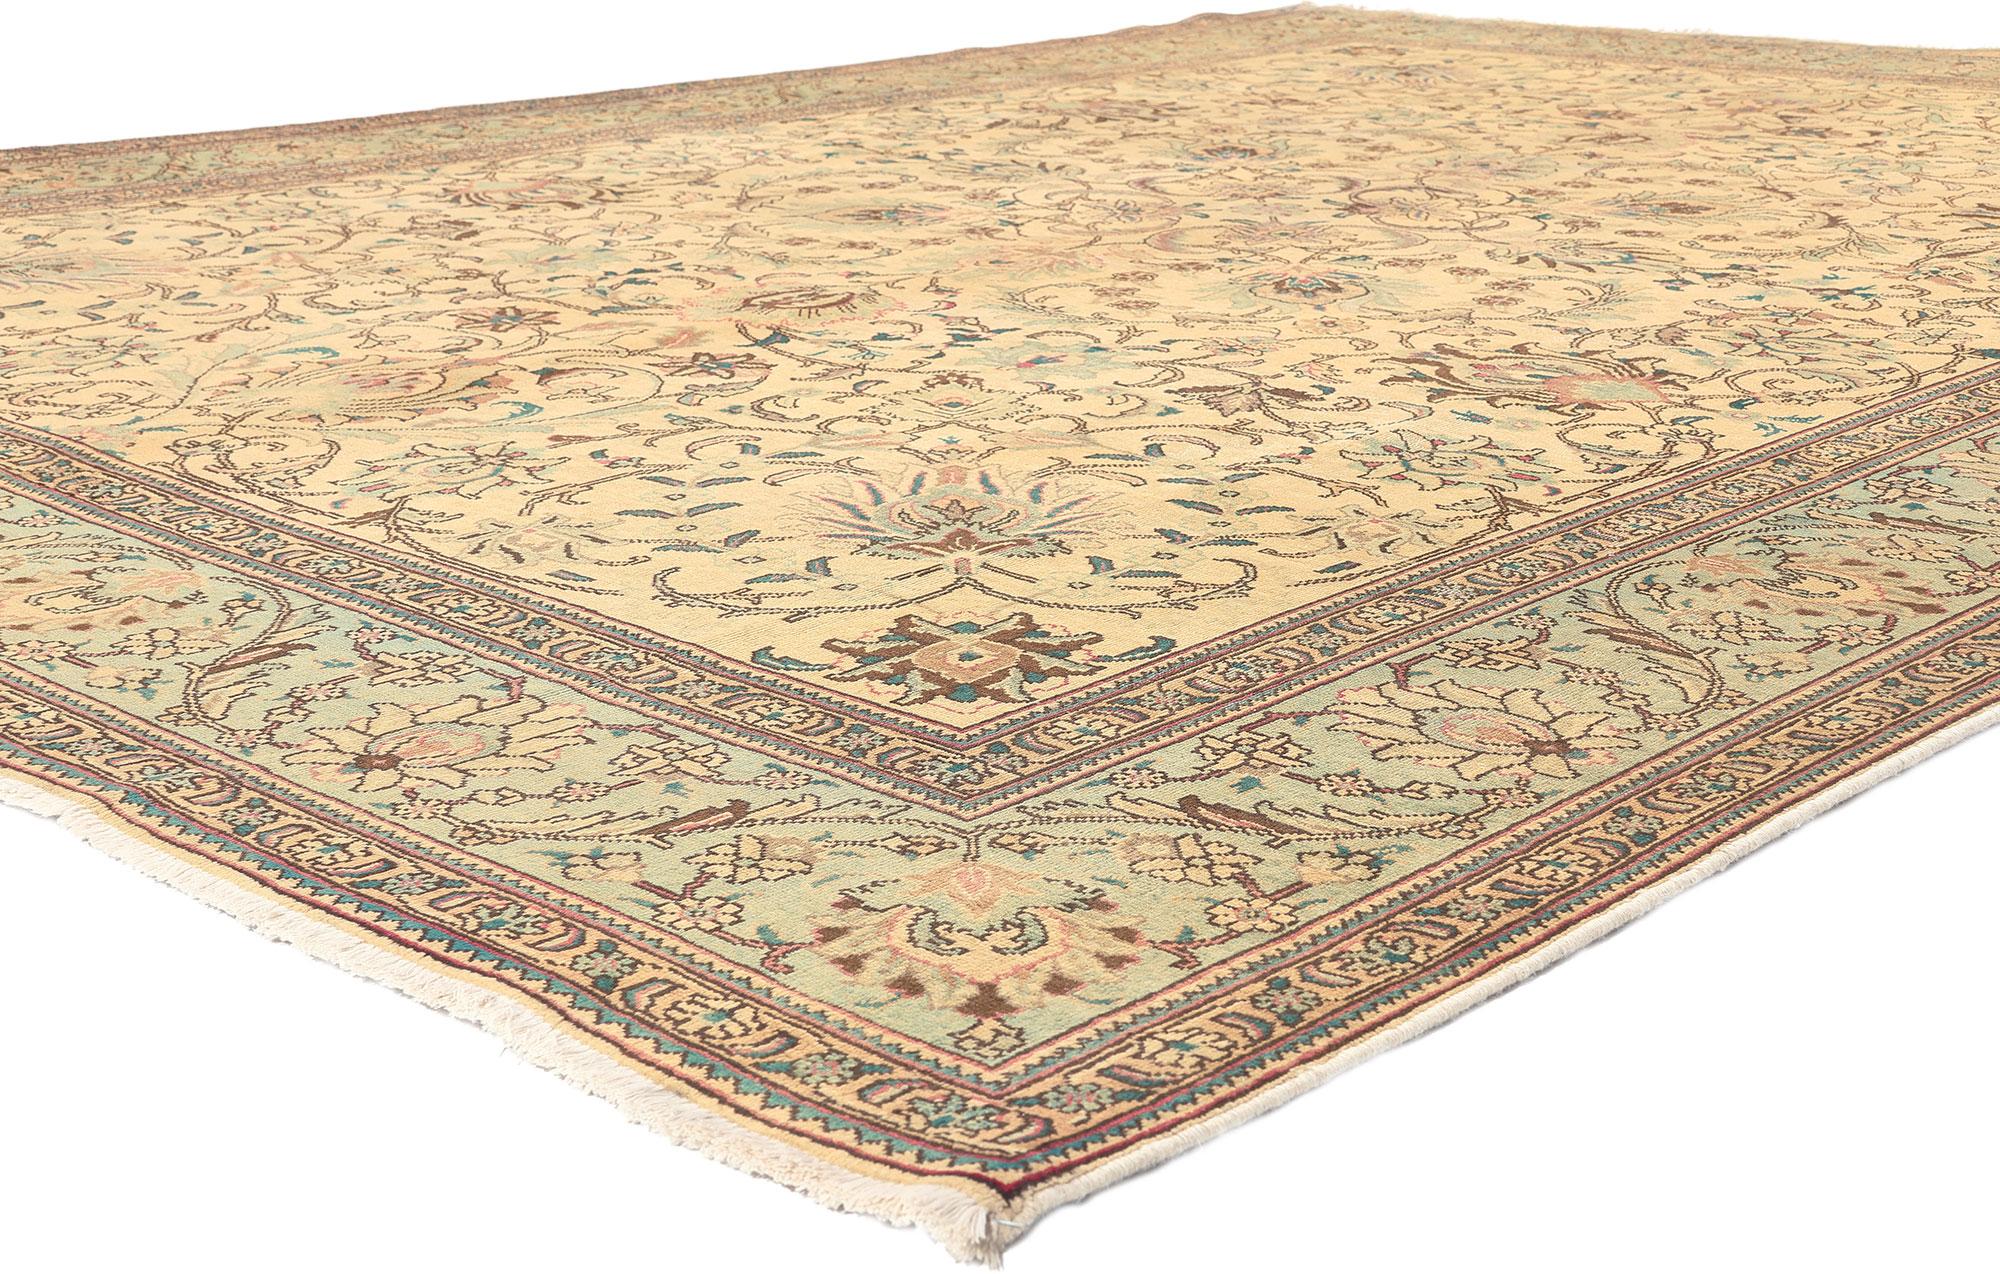 76489 Vintage Persian Tabriz Rug, 09’09 x 13’00
Refined Regence meets soft, bespoke Bridgerton style in this hand knotted wool Persian Tabriz rug. The elaborate botanical details and soft pastel colorway woven into this piece work together resulting